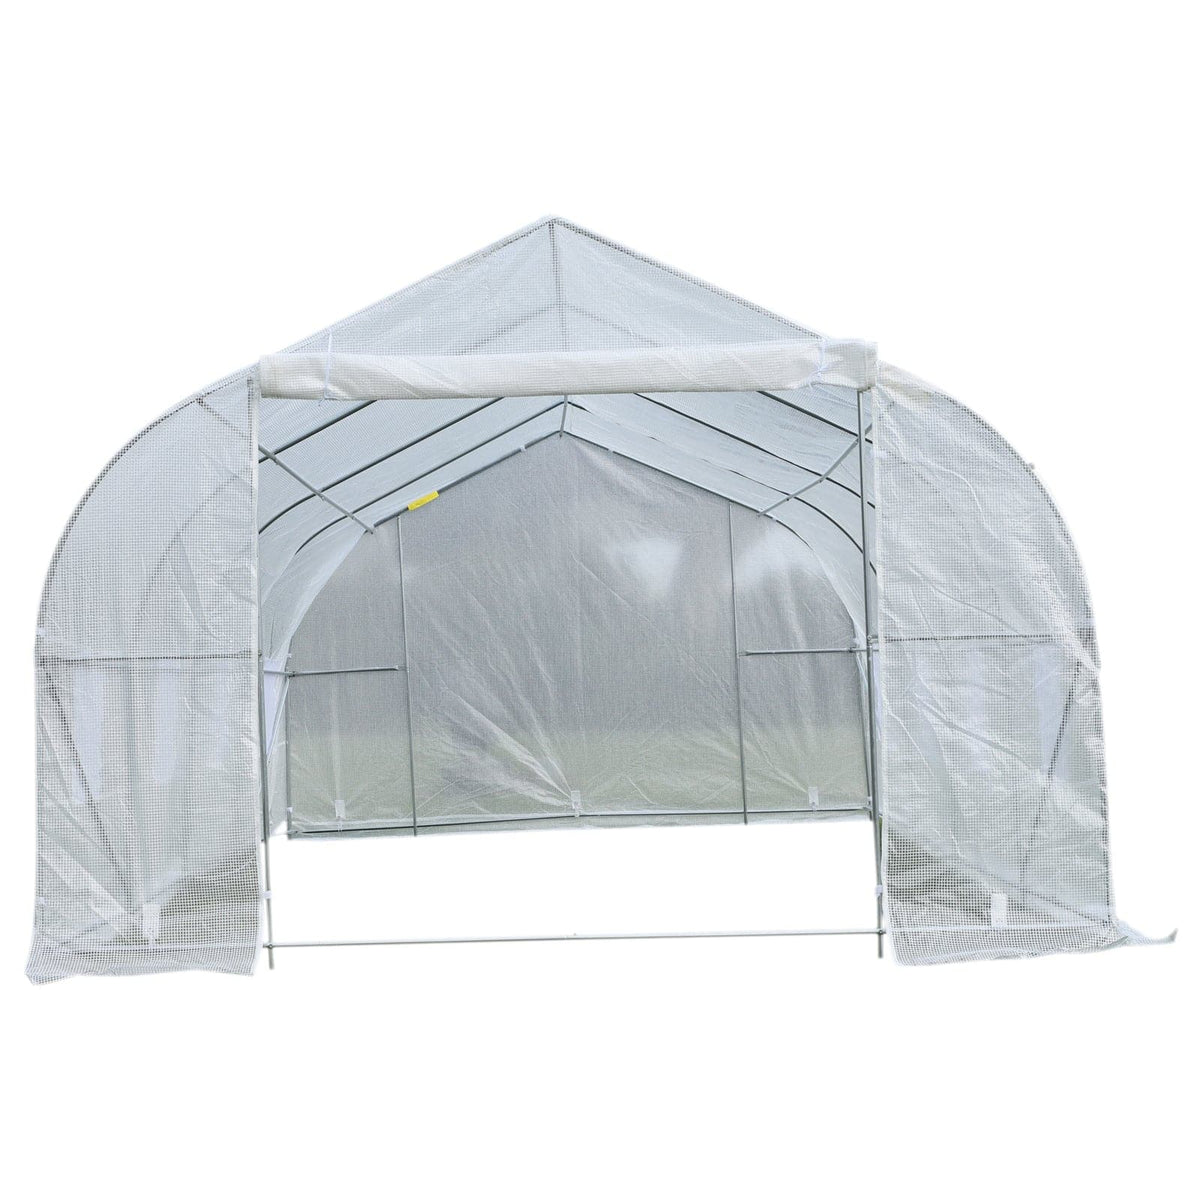 An Aosom Outsunny 20&#39; x 10&#39; x 7&#39; Deluxe High Tunnel Walk-in Garden Greenhouse Kit - White, featuring a door.